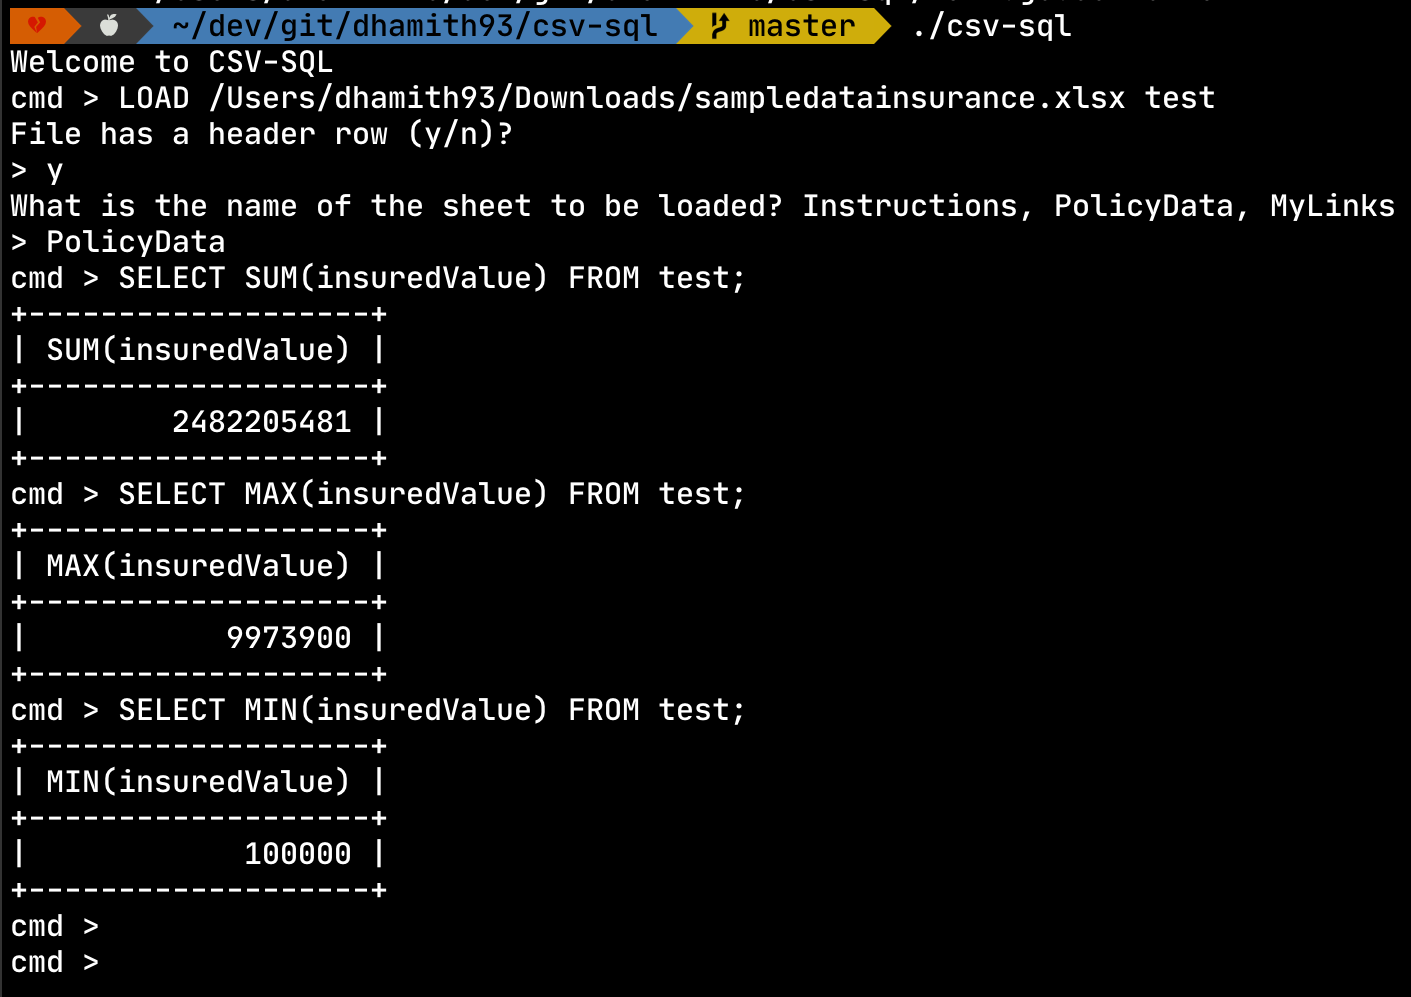 vimr from command line